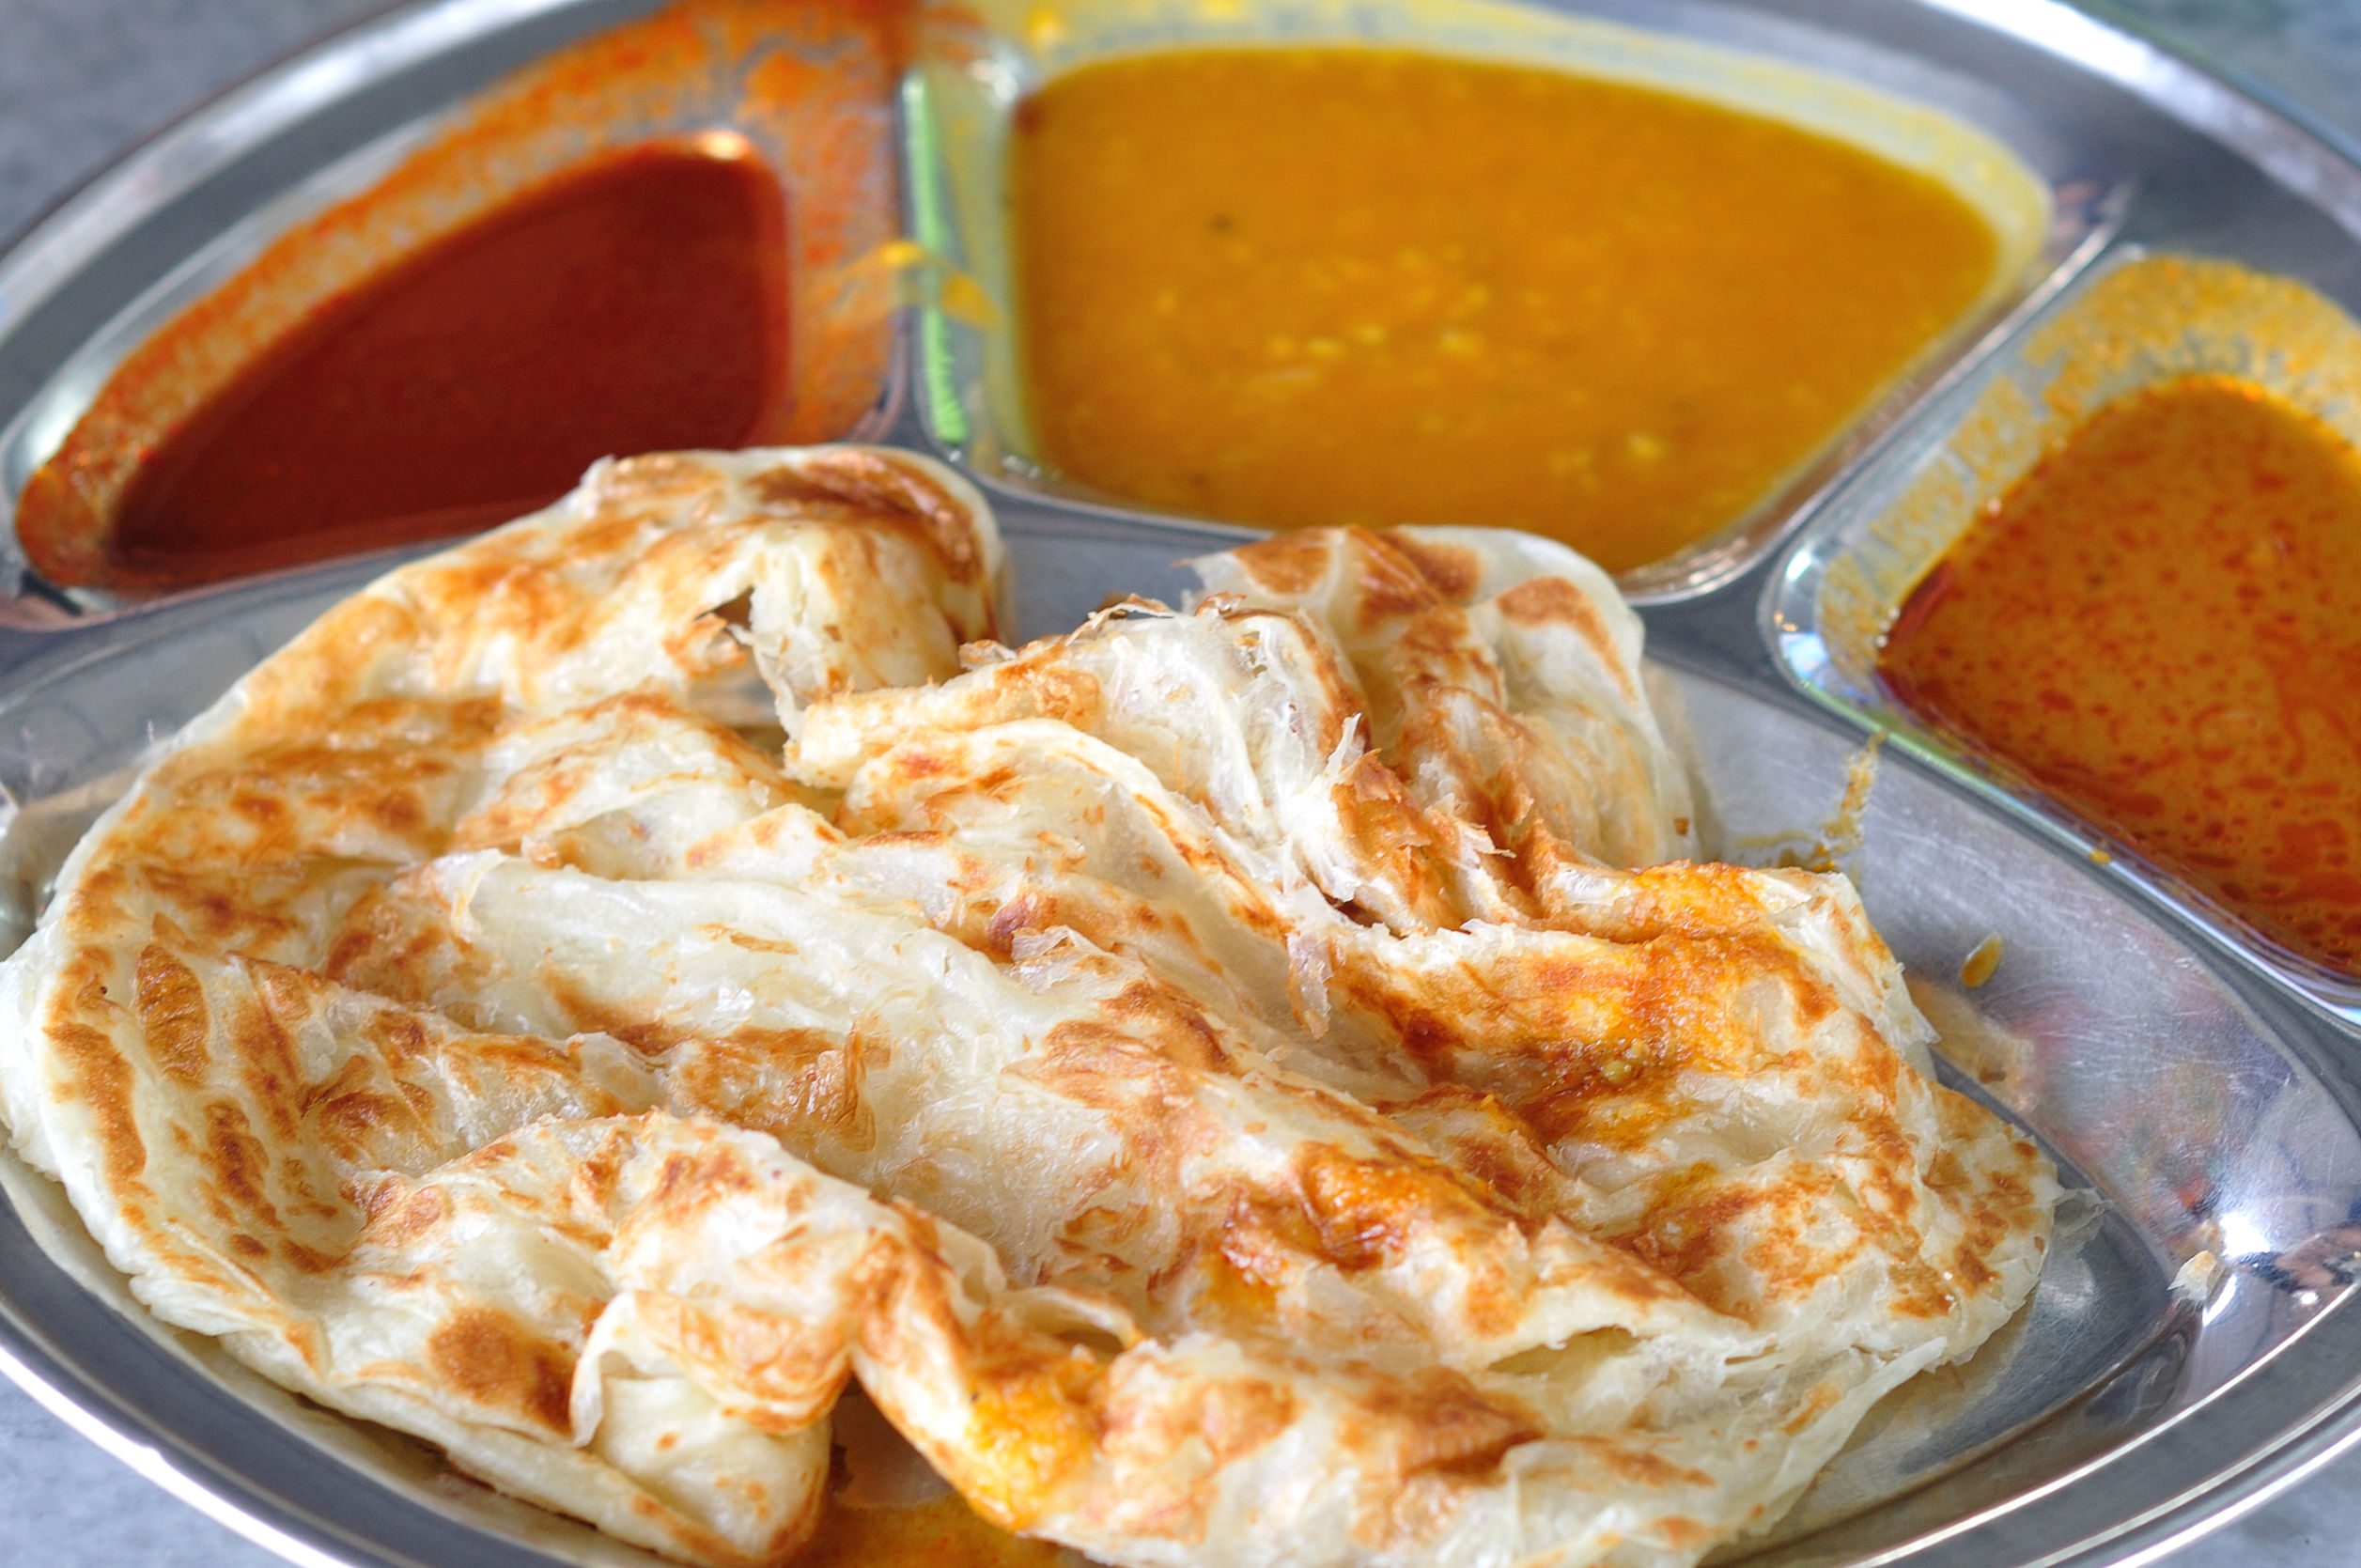 Malaysia's roti canai listed as best bread in the world.